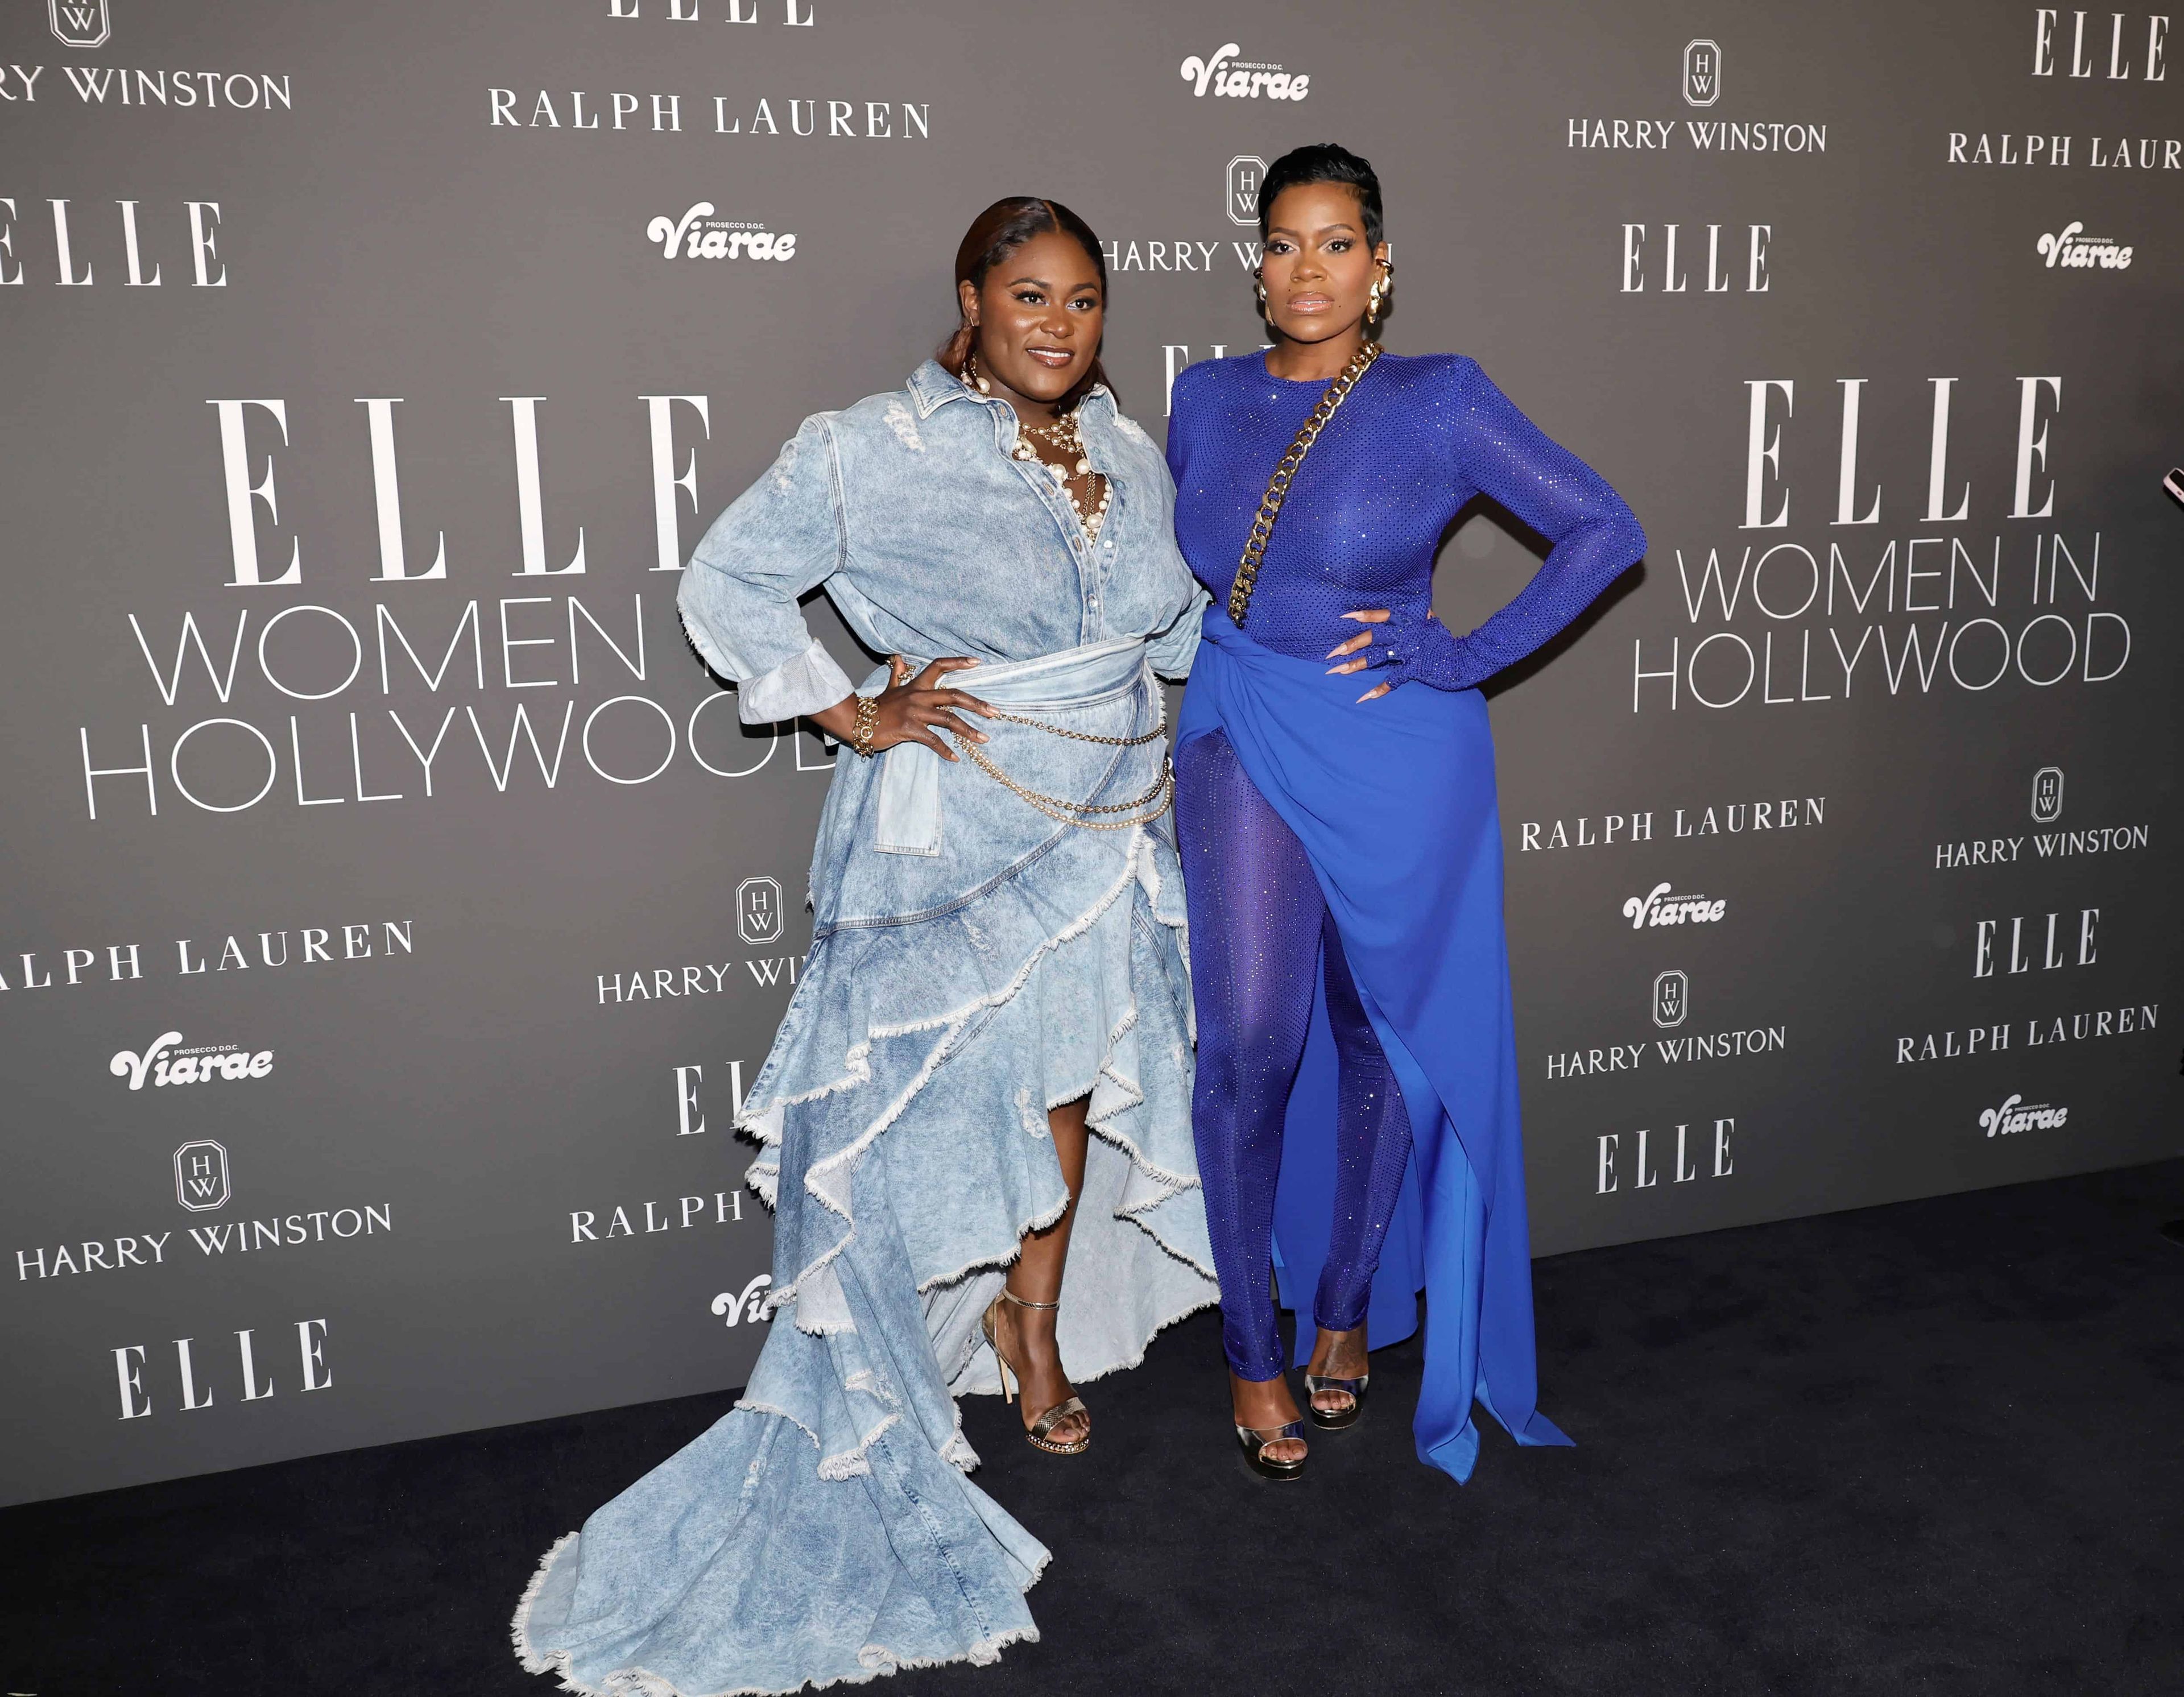 Fantasia Barrino, Danielle Brooks Receive Golden Globes Nominations For 'The Color Purple'